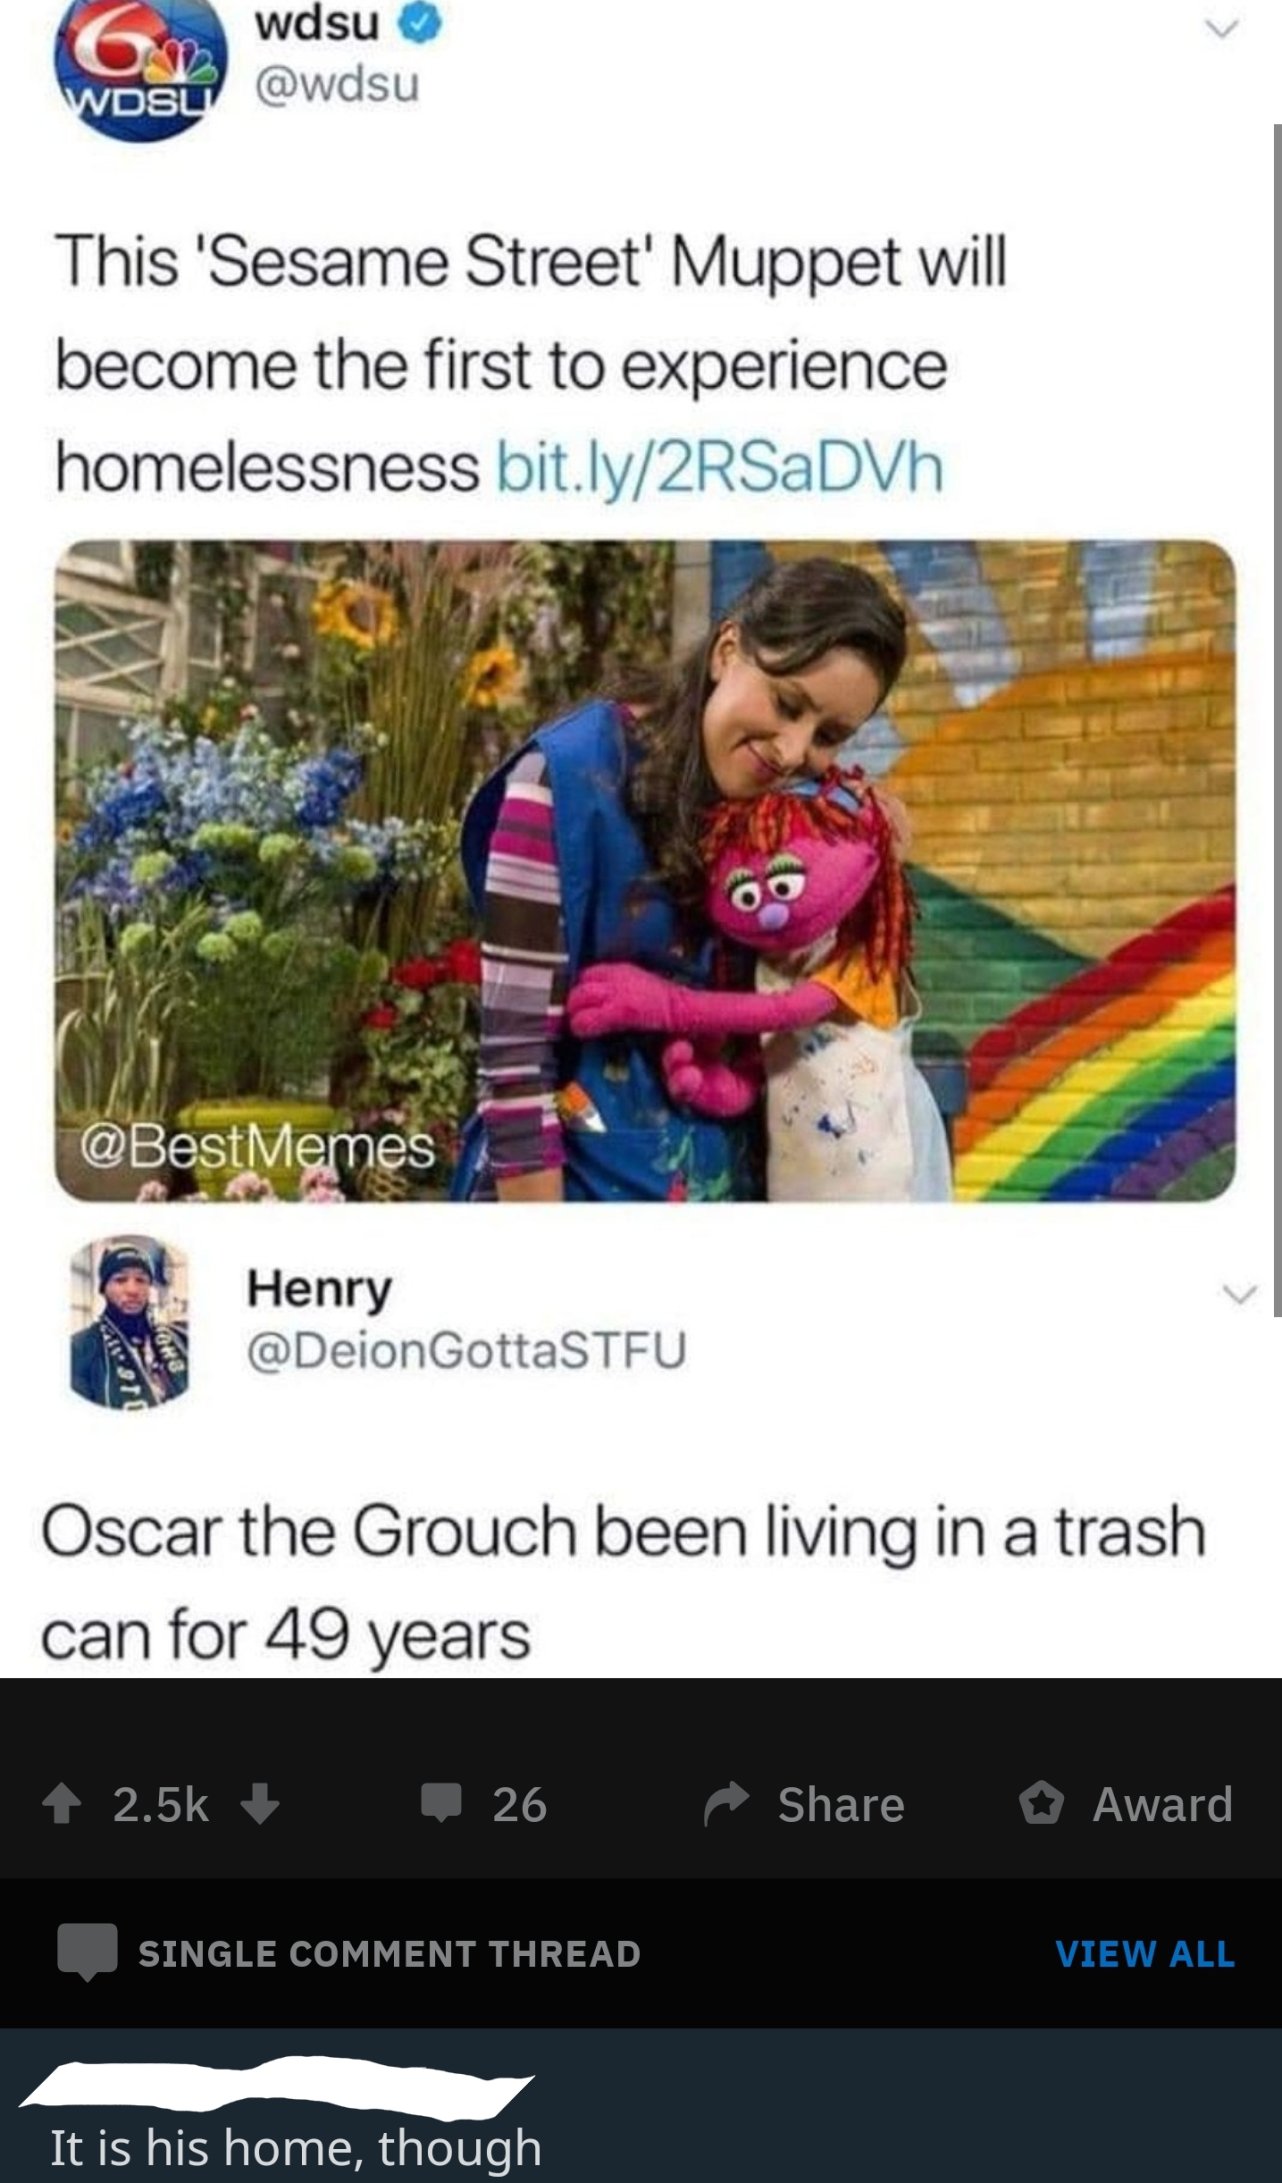 sesame street homeless meme - wdsu Wdsu This 'Sesame Street' Muppet will become the first to experience homelessness bit.ly2RSaDVh Henry GottaSTFU 18 Oscar the Grouch been living in a trash can for 49 years 1 2.5% 26 Award U Single Comment Thread View All